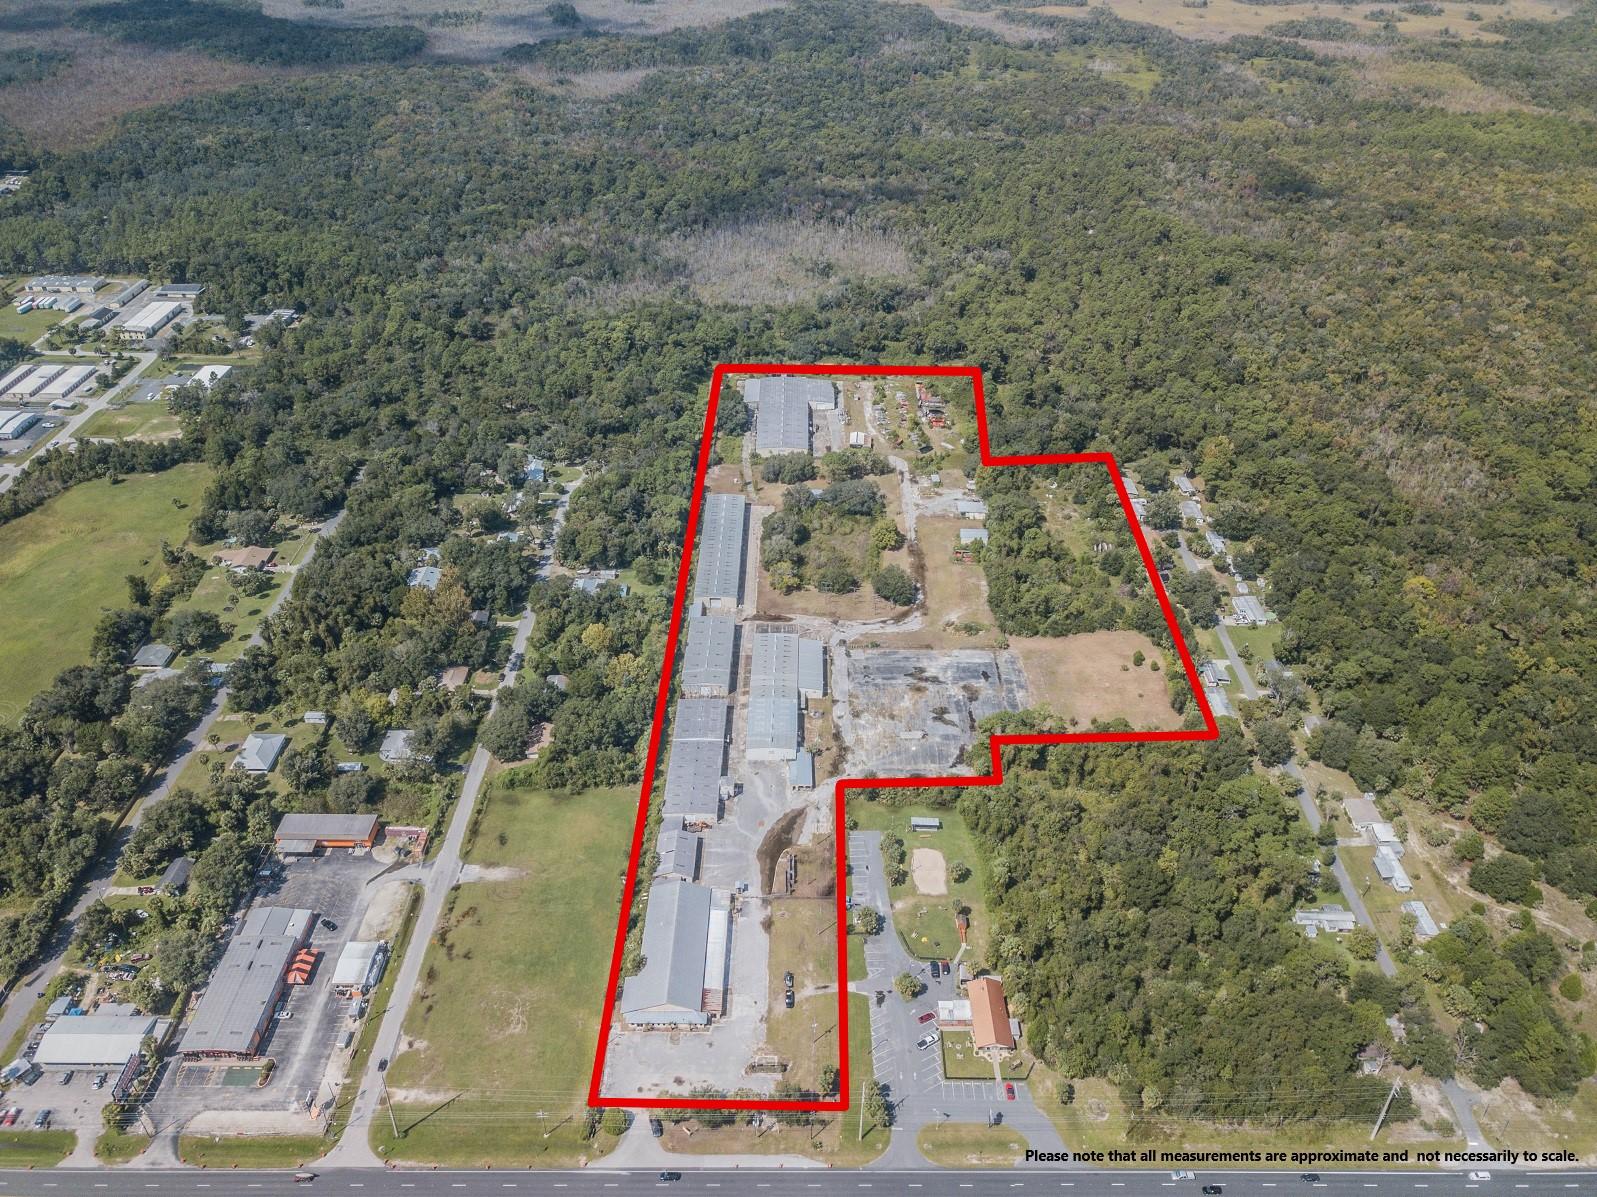 104,000± sq ft of warehouse buildings located on 19.44± acres